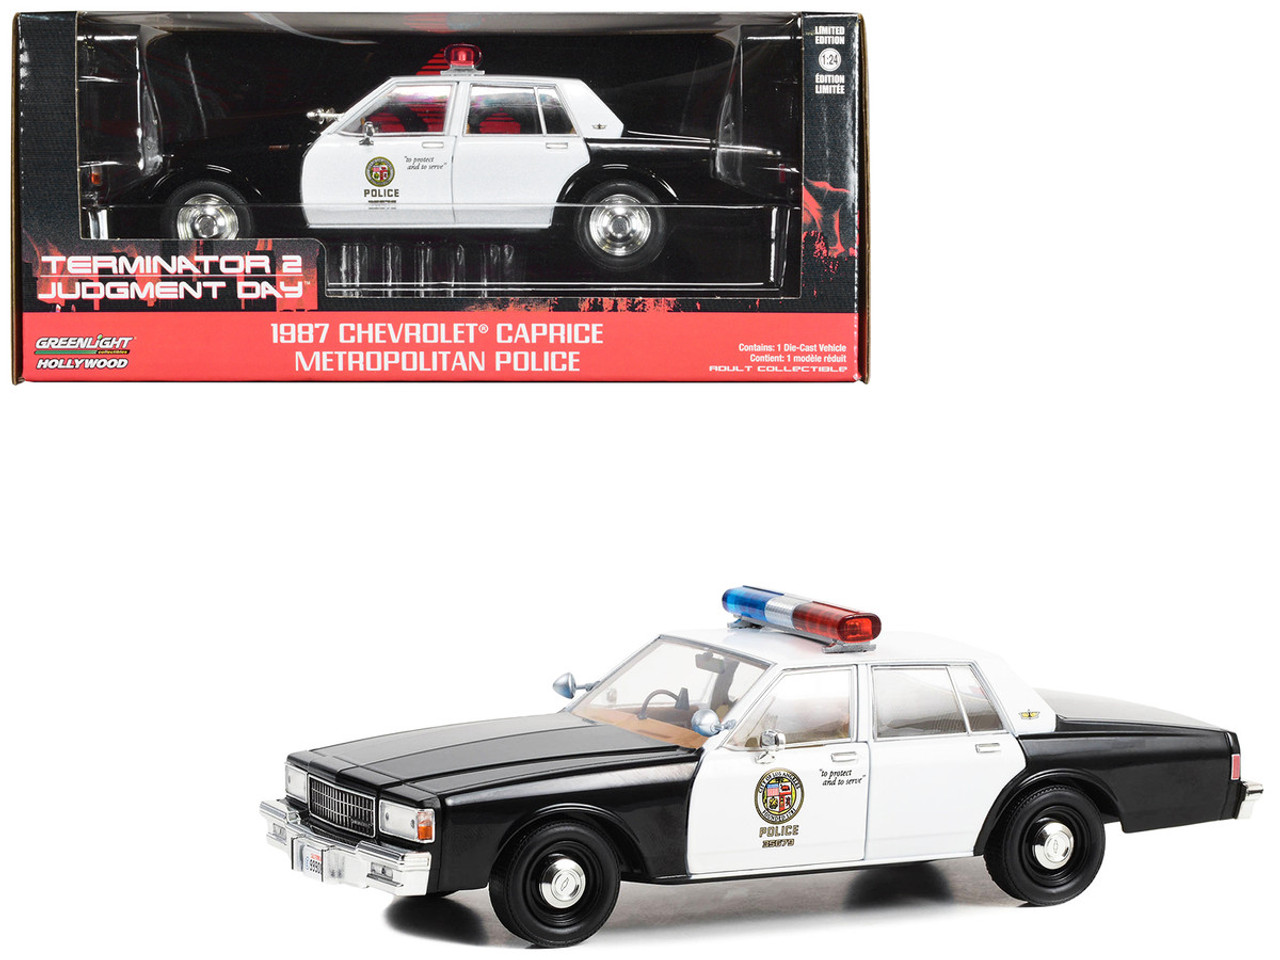 1987 Chevrolet Caprice Metropolitan Police Black and White "LAPD (Los Angeles Police Department)" "Terminator 2: Judgment Day" (1991) Movie "Hollywood" Series 1/24 Diecast Model Car by Greenlight